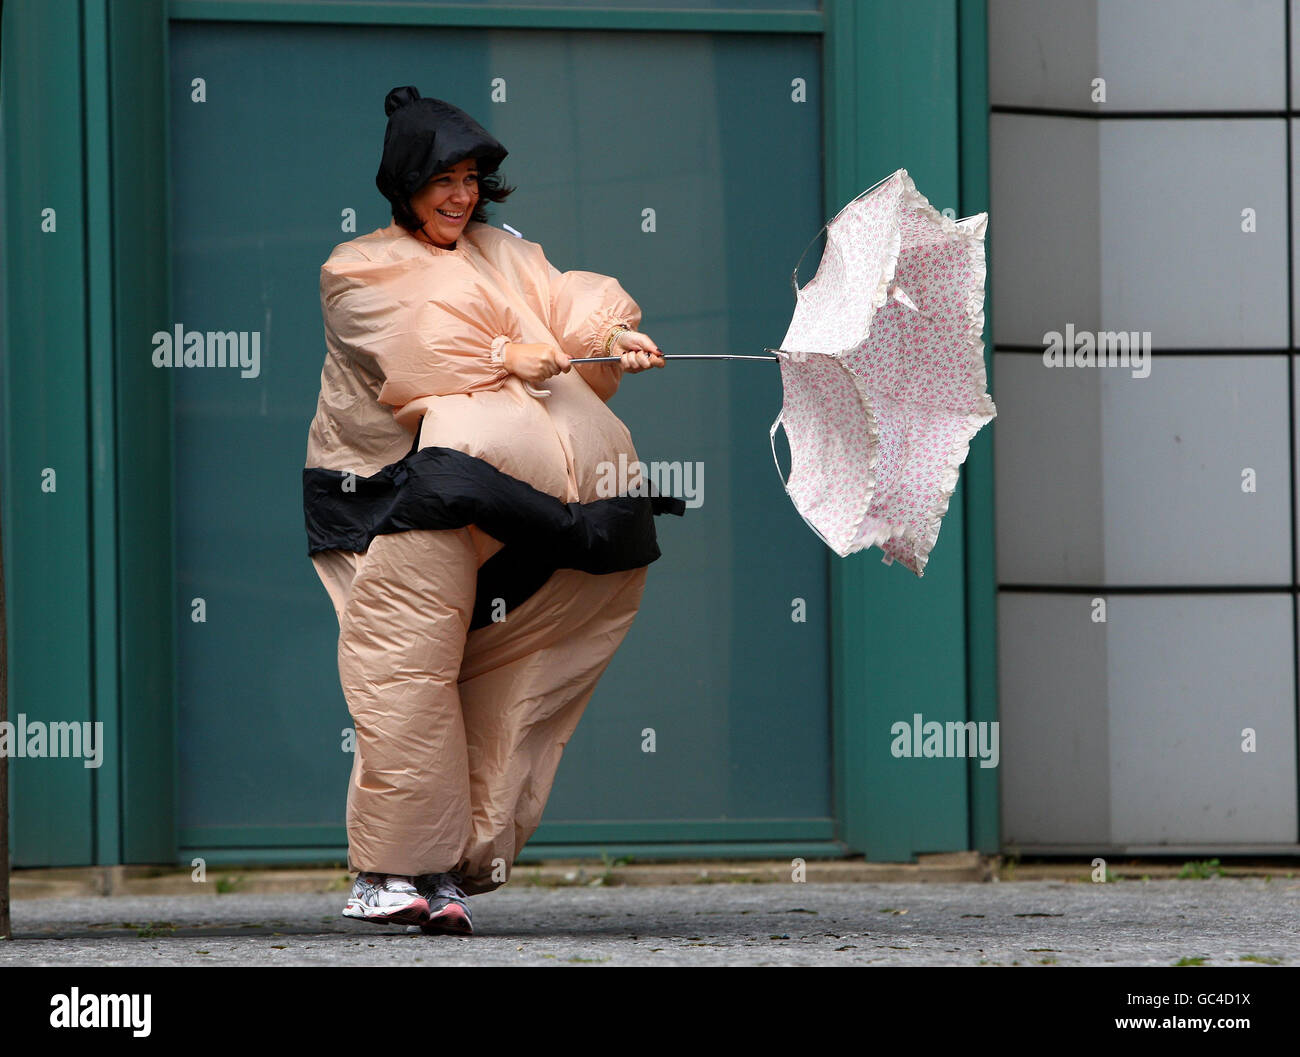 Alex Mickelson in a Sumo wrestlers suit struggles with an umbrella in the wind in Edinburgh's Festival Square, helping to raise money by walking a mile, which will add up to 500 miles for the Miles for Smiles event. Stock Photo